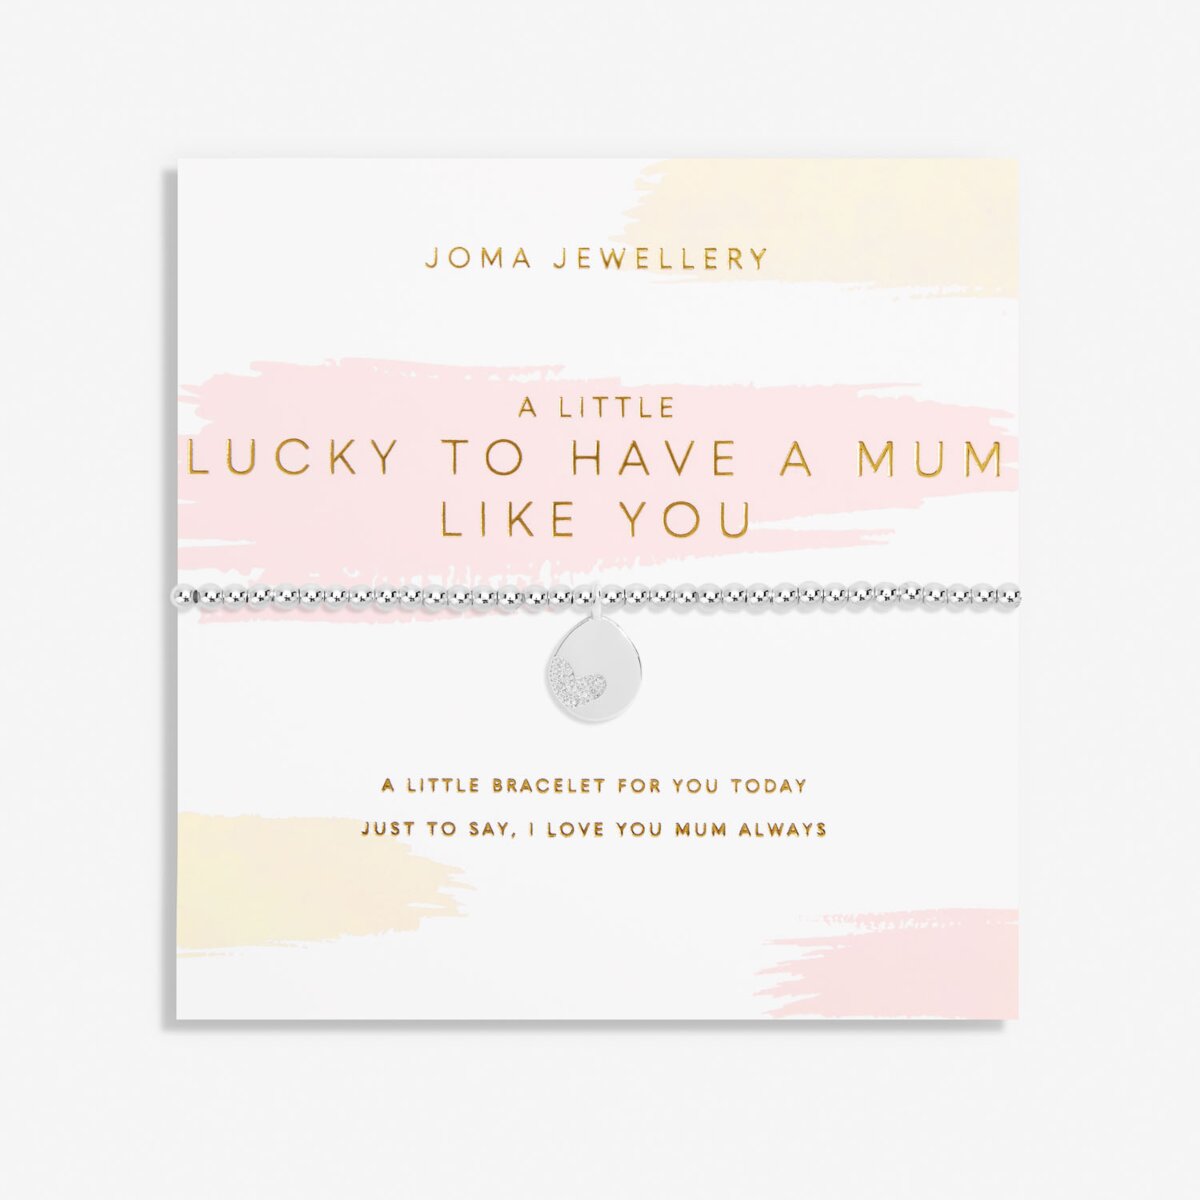 JOMA JEWELLERY | MOTHER'S DAY A LITTLE | LUCKY TO HAVE A MUM LIKE YOU BRACELET